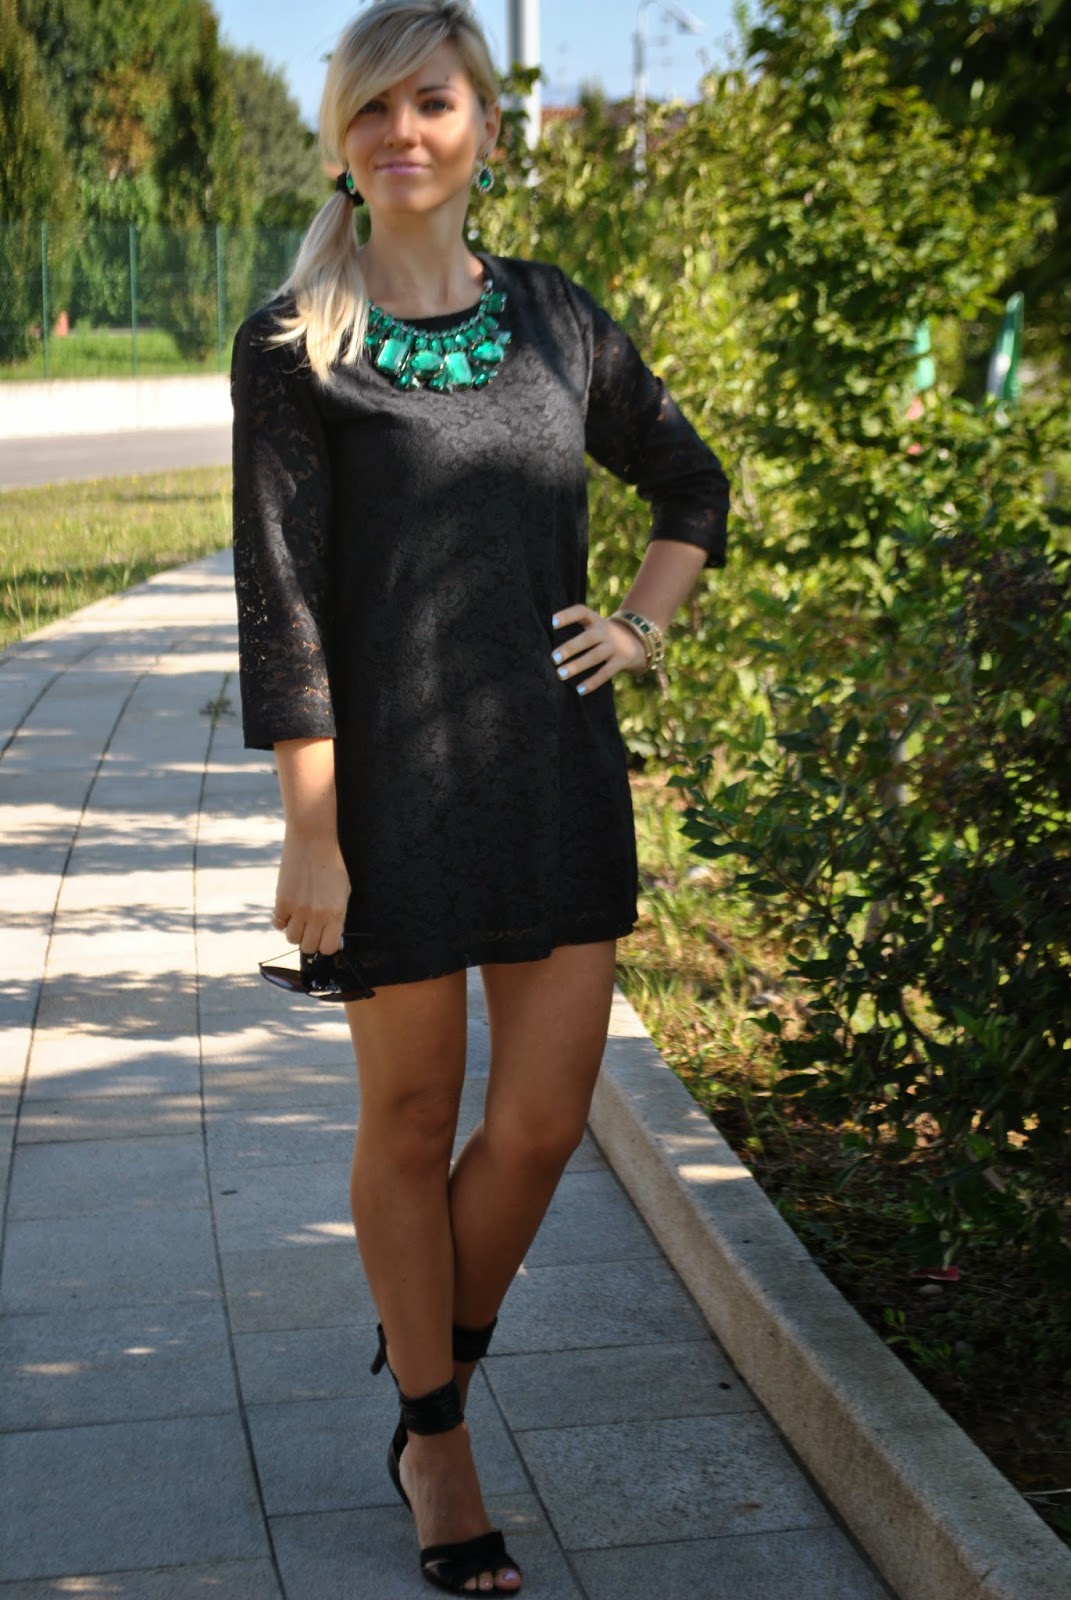 Color-Block By FelyM.: BLACK LACE DRESS AND EMERALD ACCESSORIES